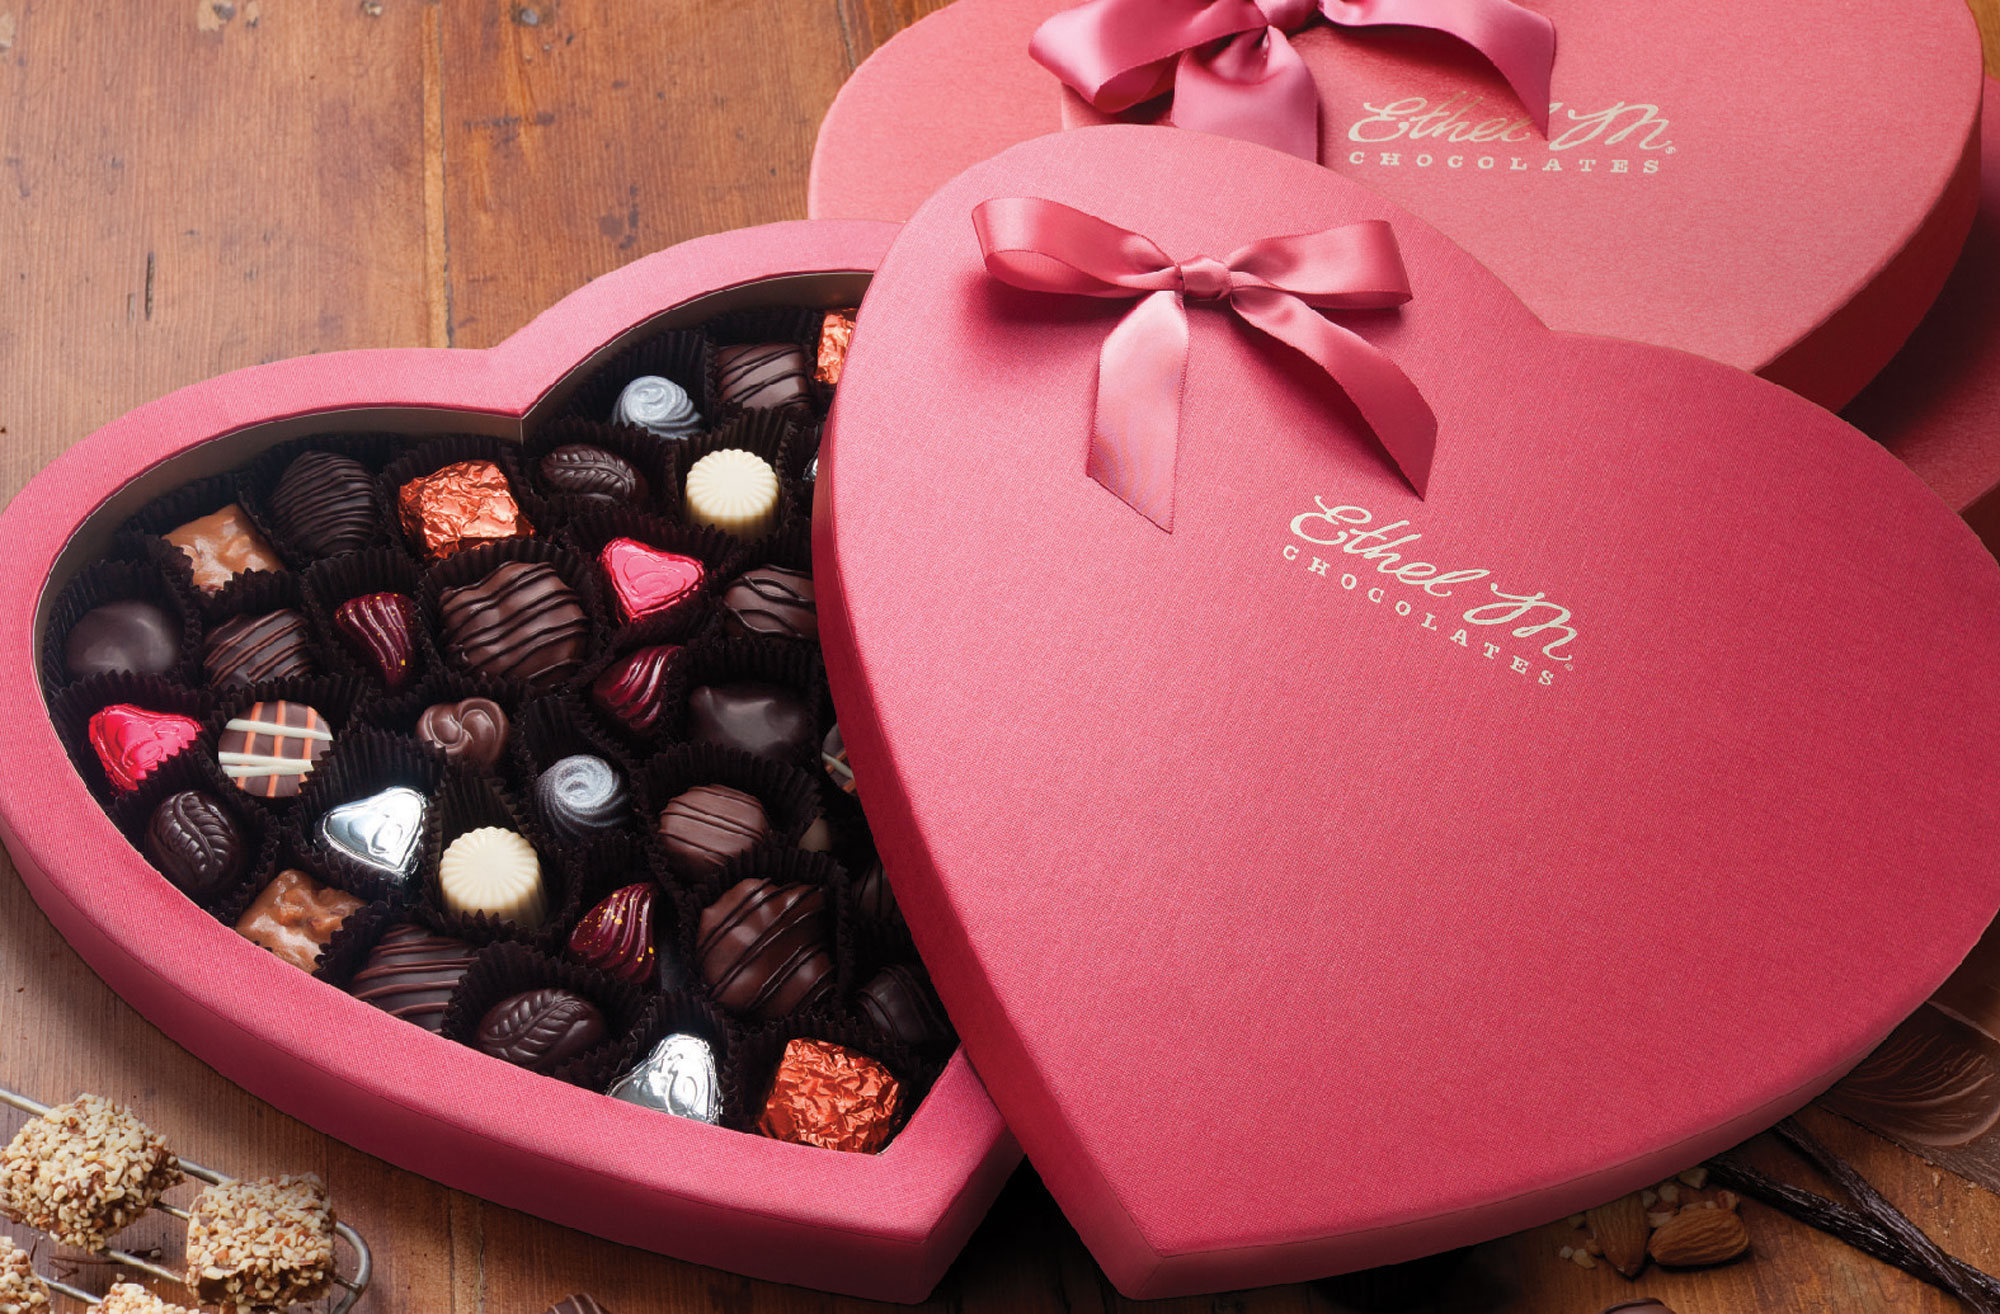 Chocolate Gift as Valentines Gift Ideas For Her.